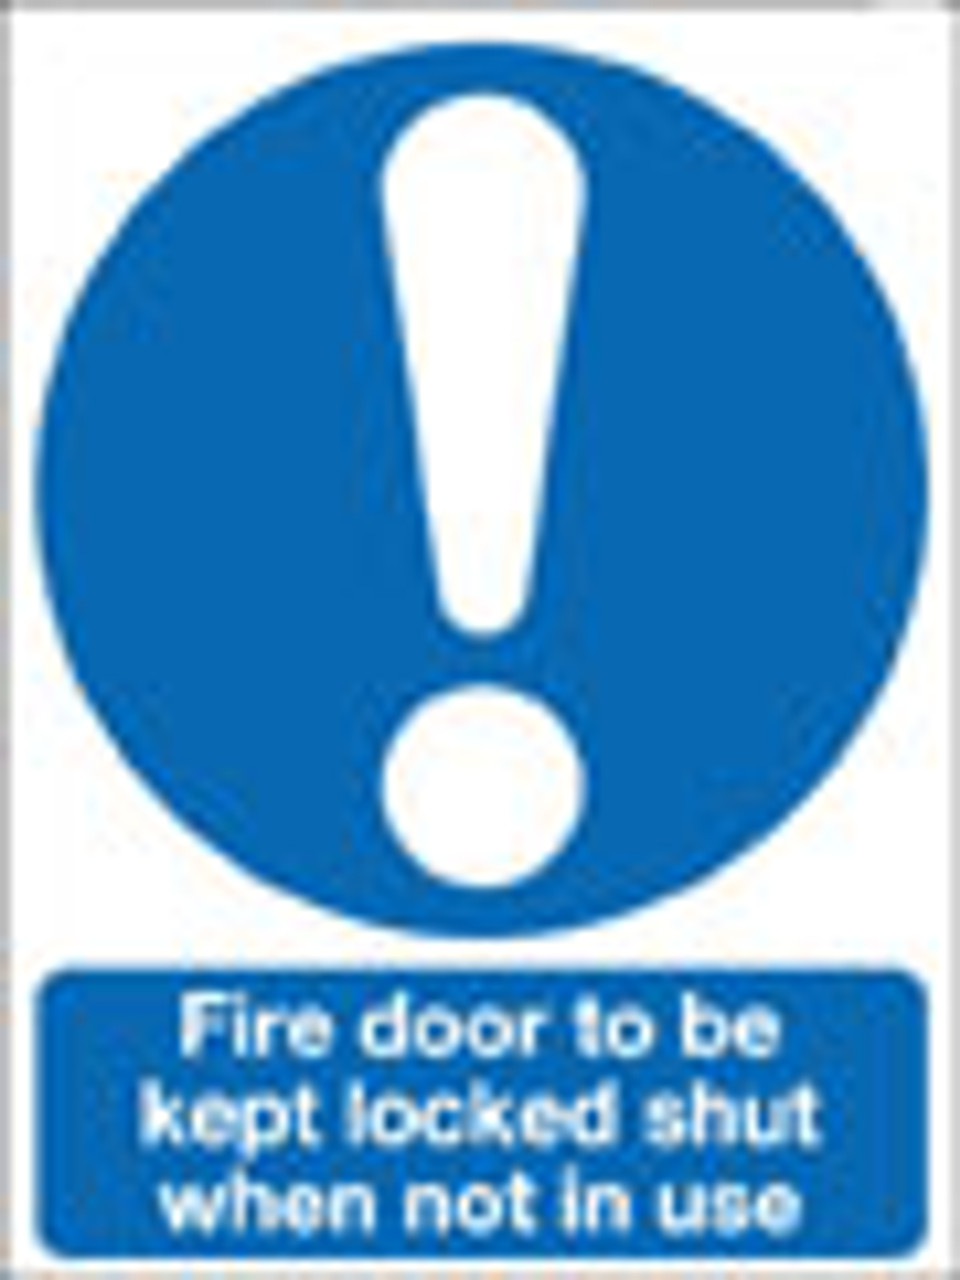 Fire door sign, to be kept locked shut when not in use